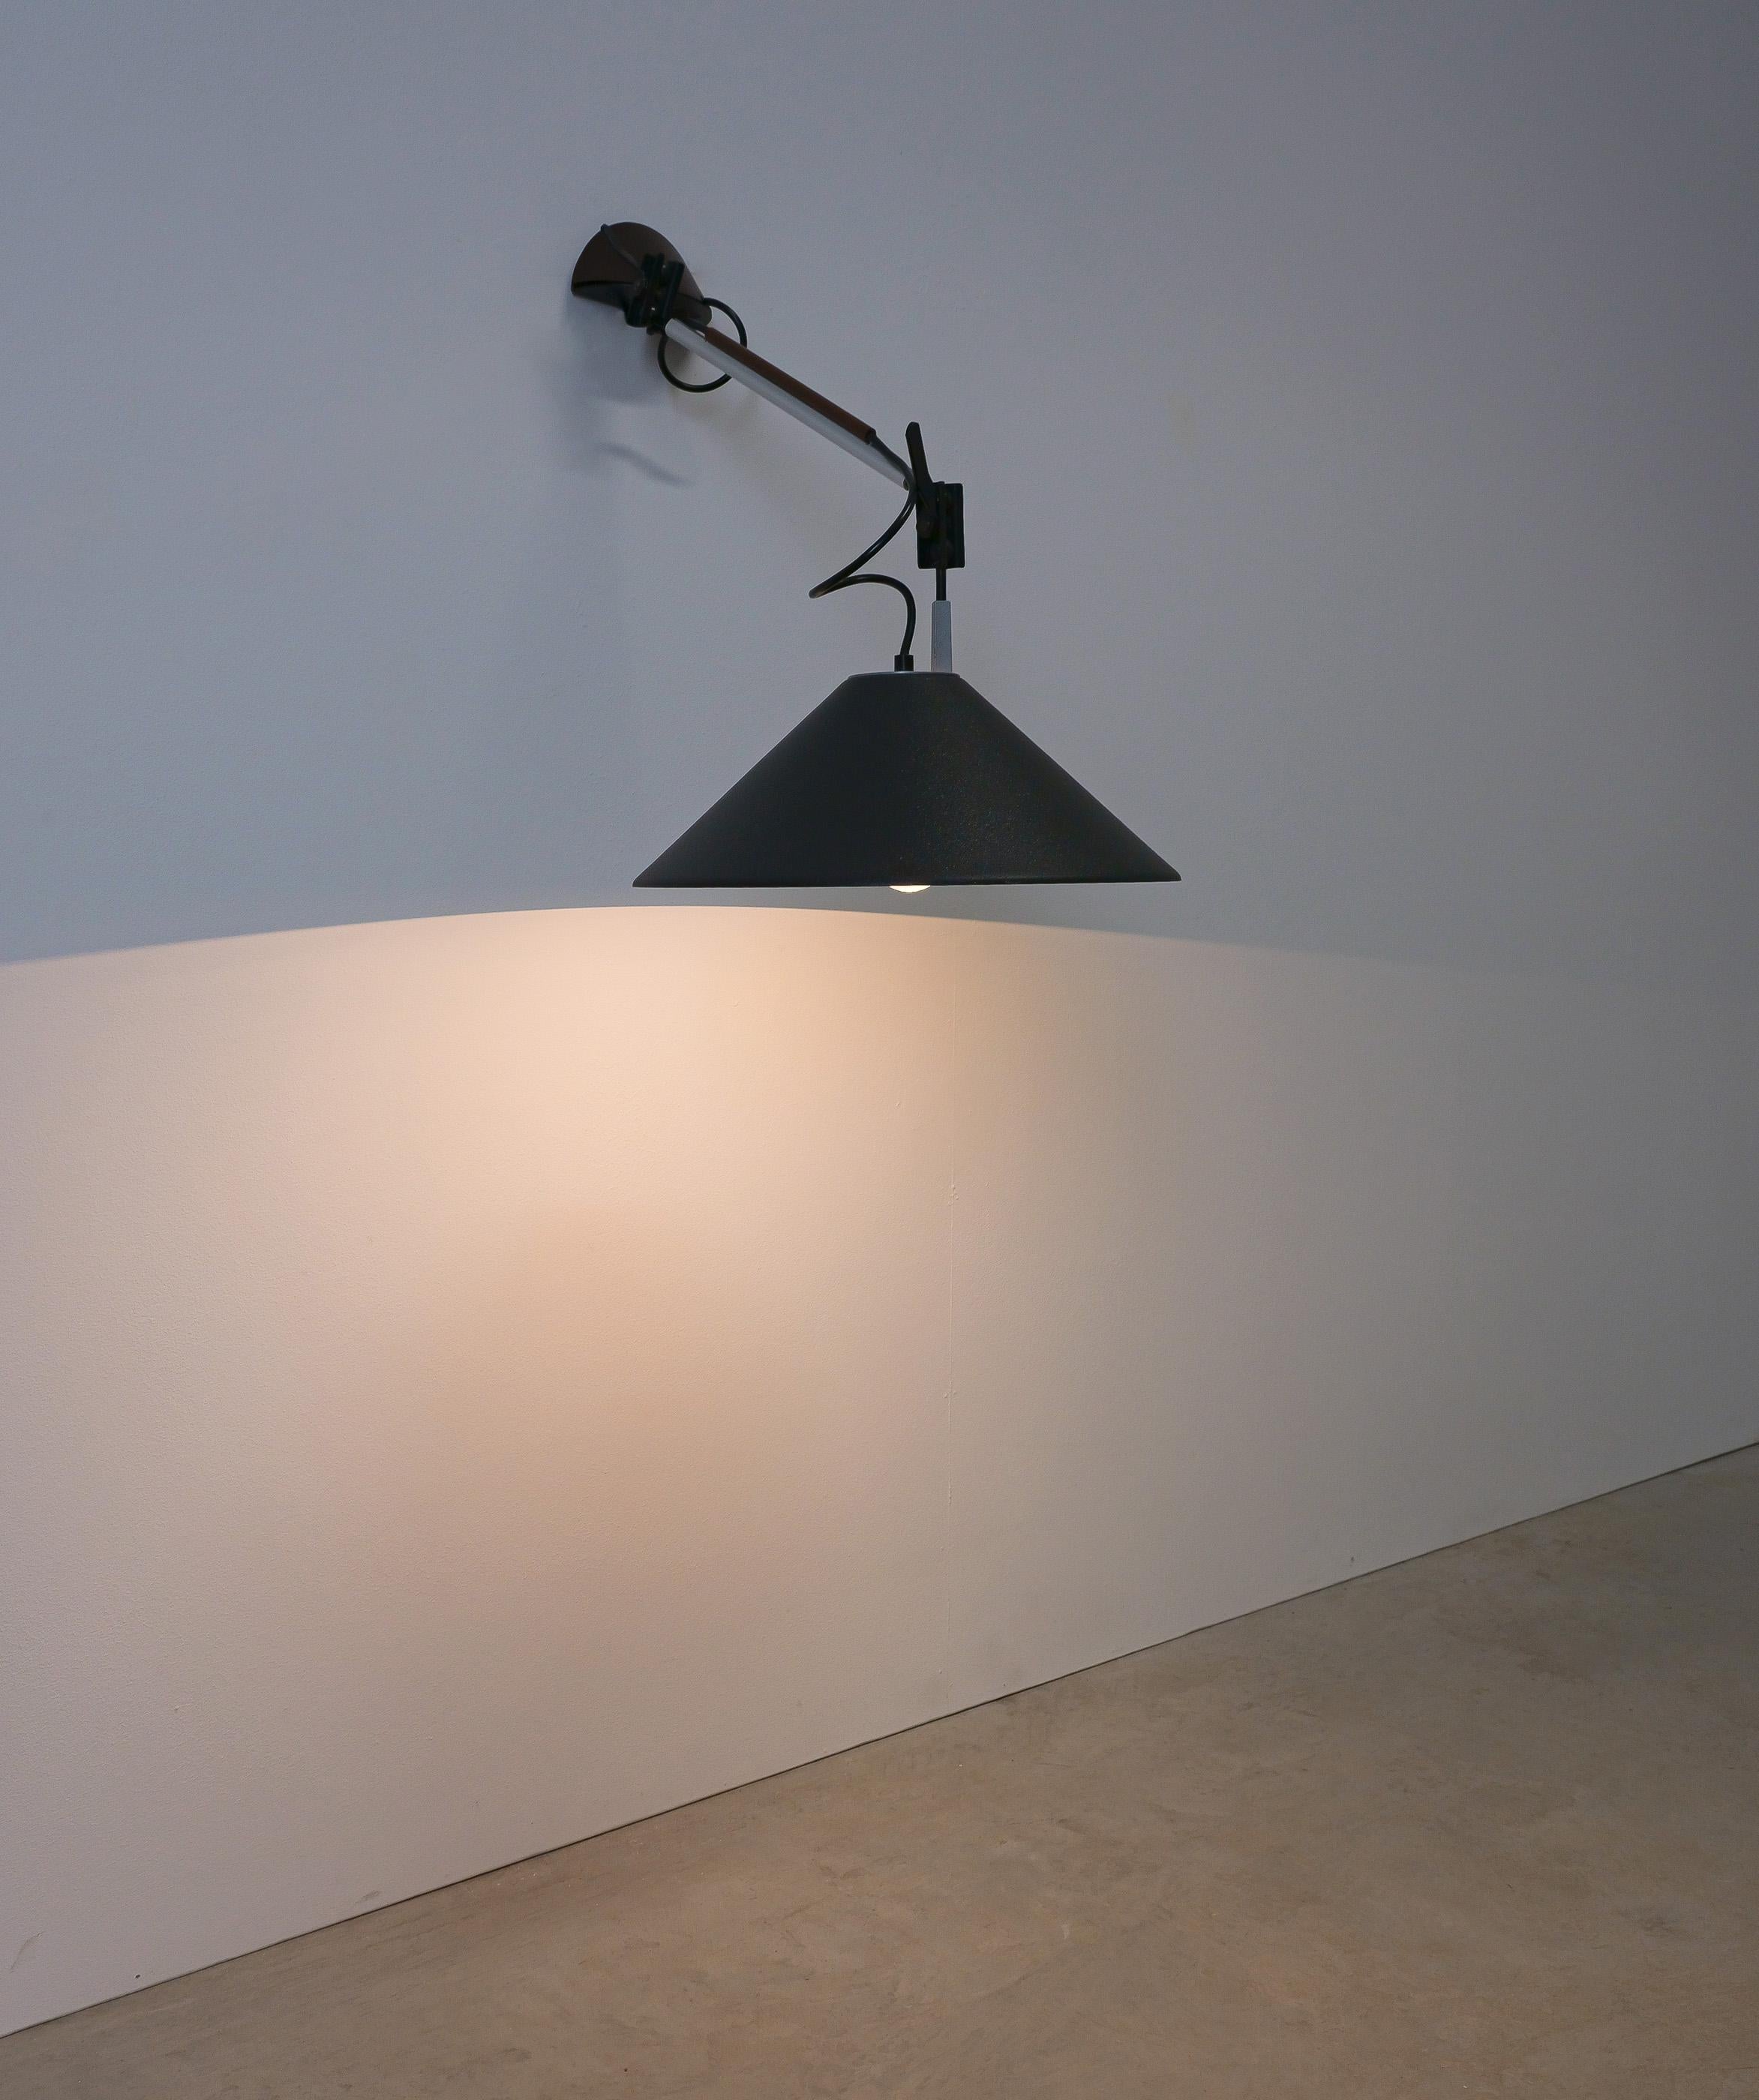 Lacquered Pair Of Wall Lamps Aggregato by Enzo Mari Black Shades Aluminum, circa 1970 For Sale